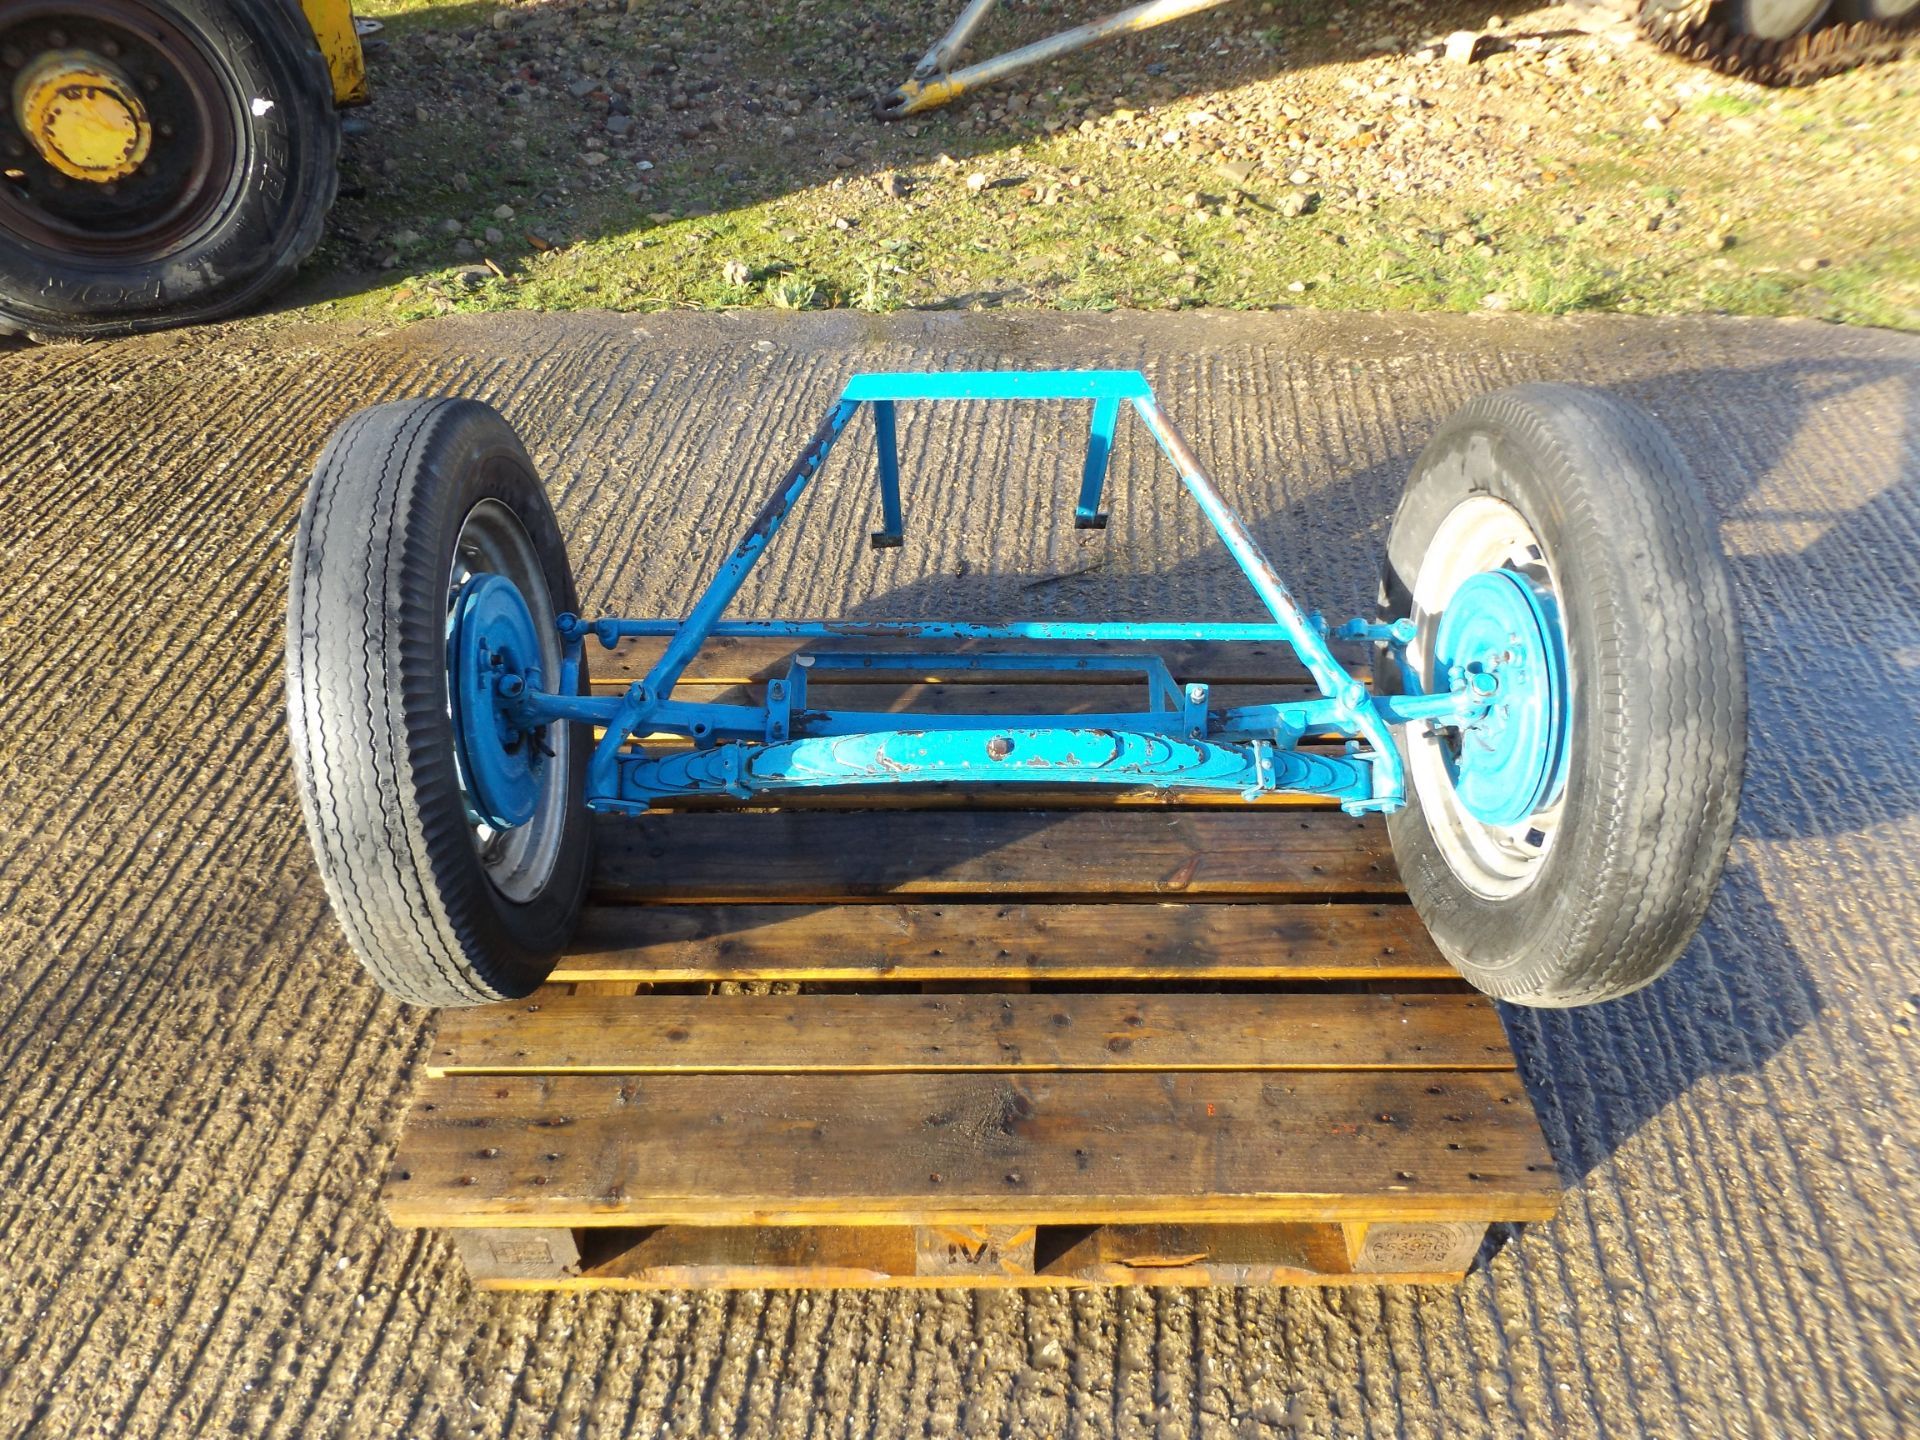 Wheel, Tyre and Steering Assembly